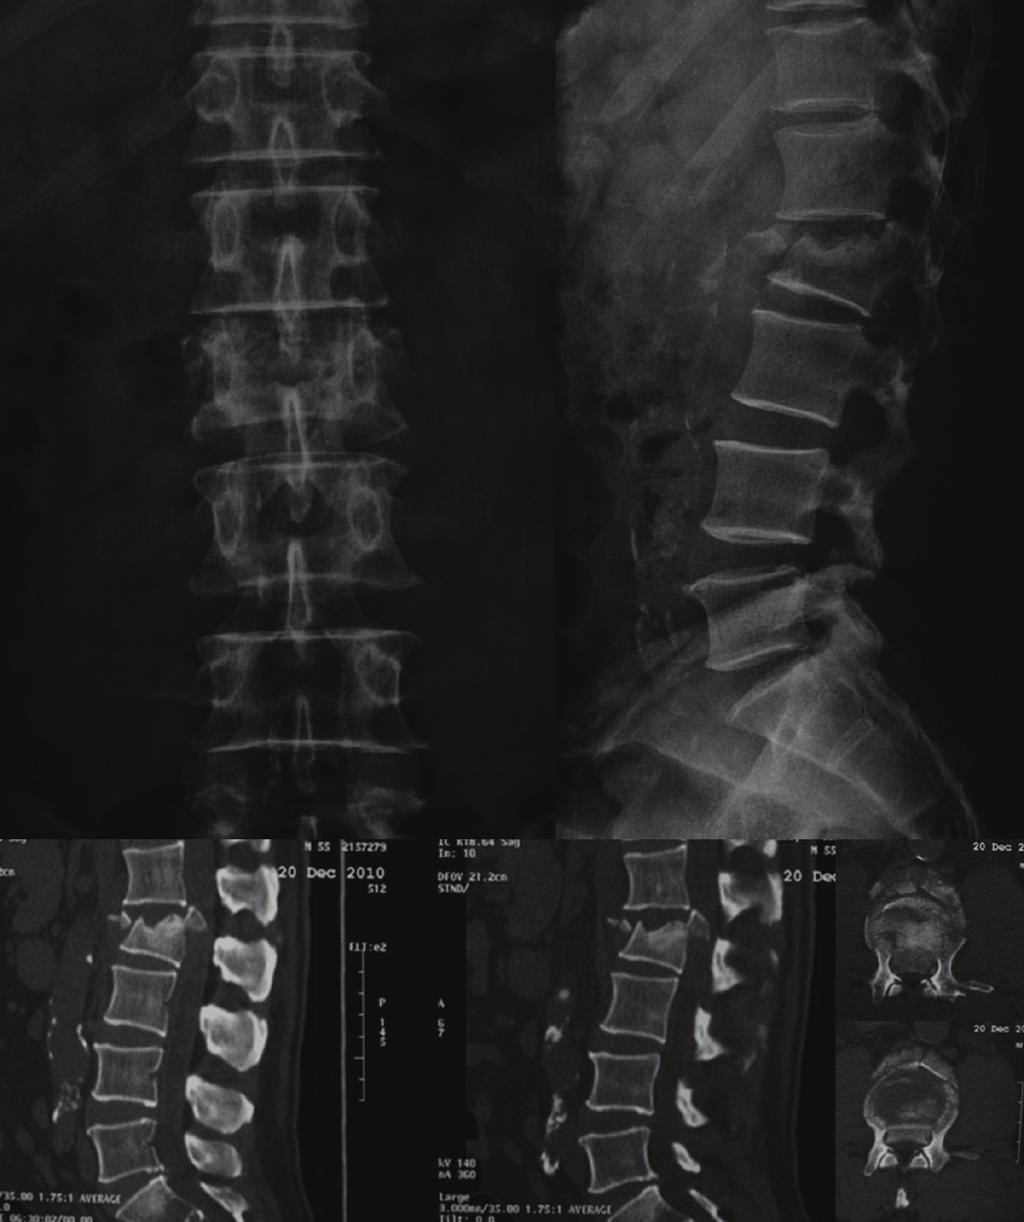 2 Case Reports in Orthopedics Figure 1: X-ray and CT scan showing a burst fracture on L2 vertebra with a fragment inside the spinal canal.